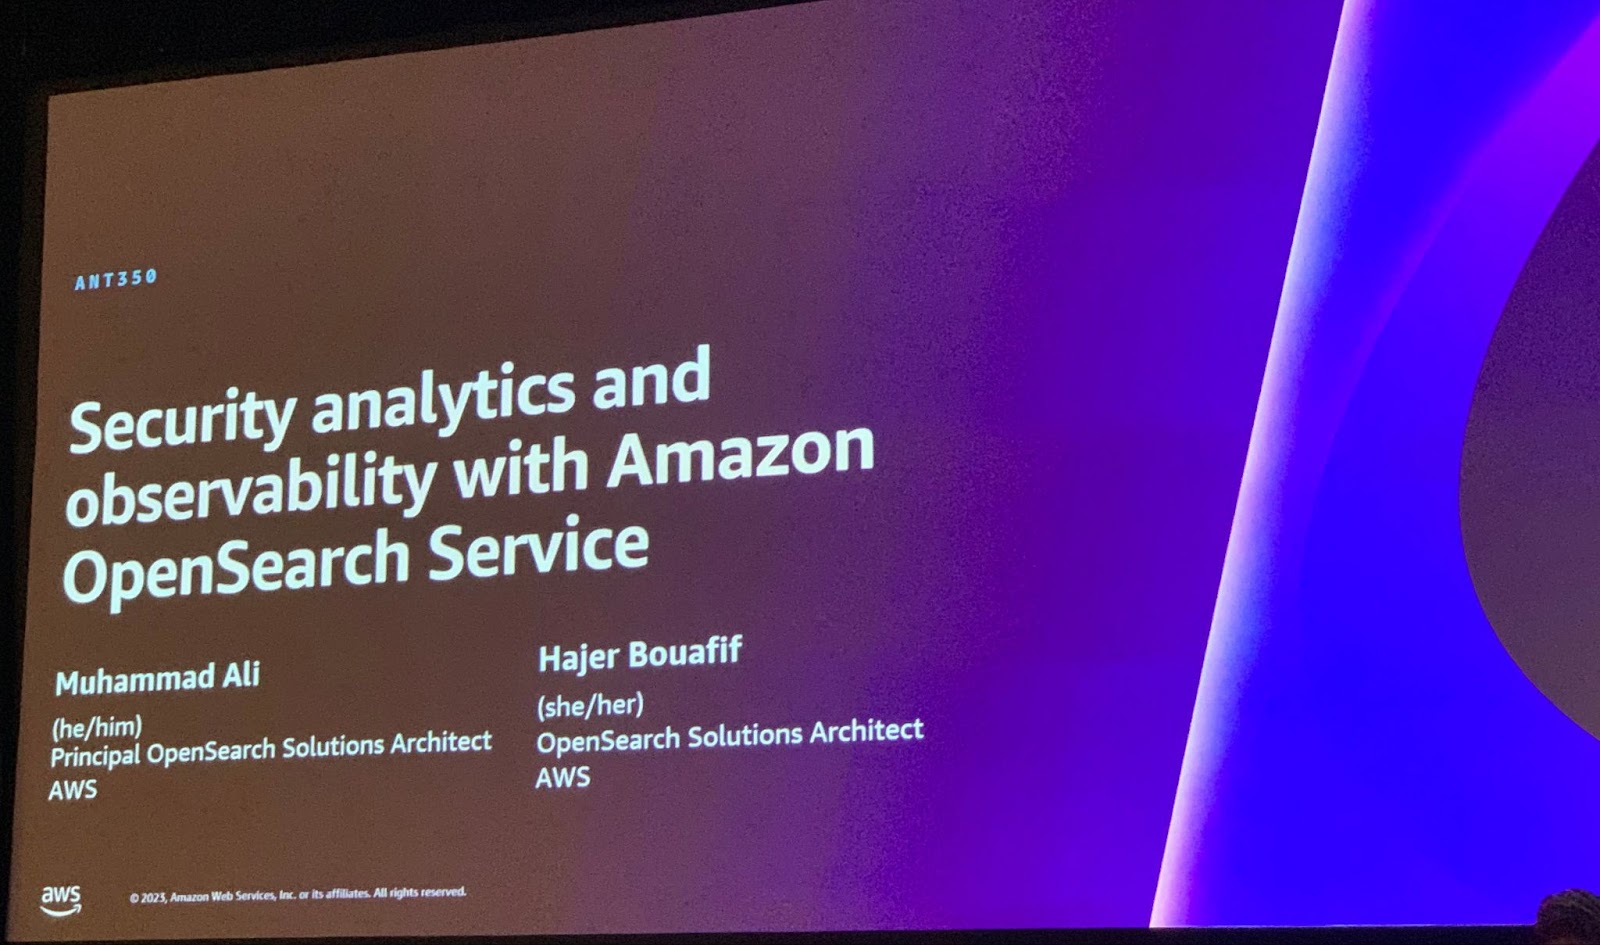 Security analytics and observability with Amazon OpenSearch Service